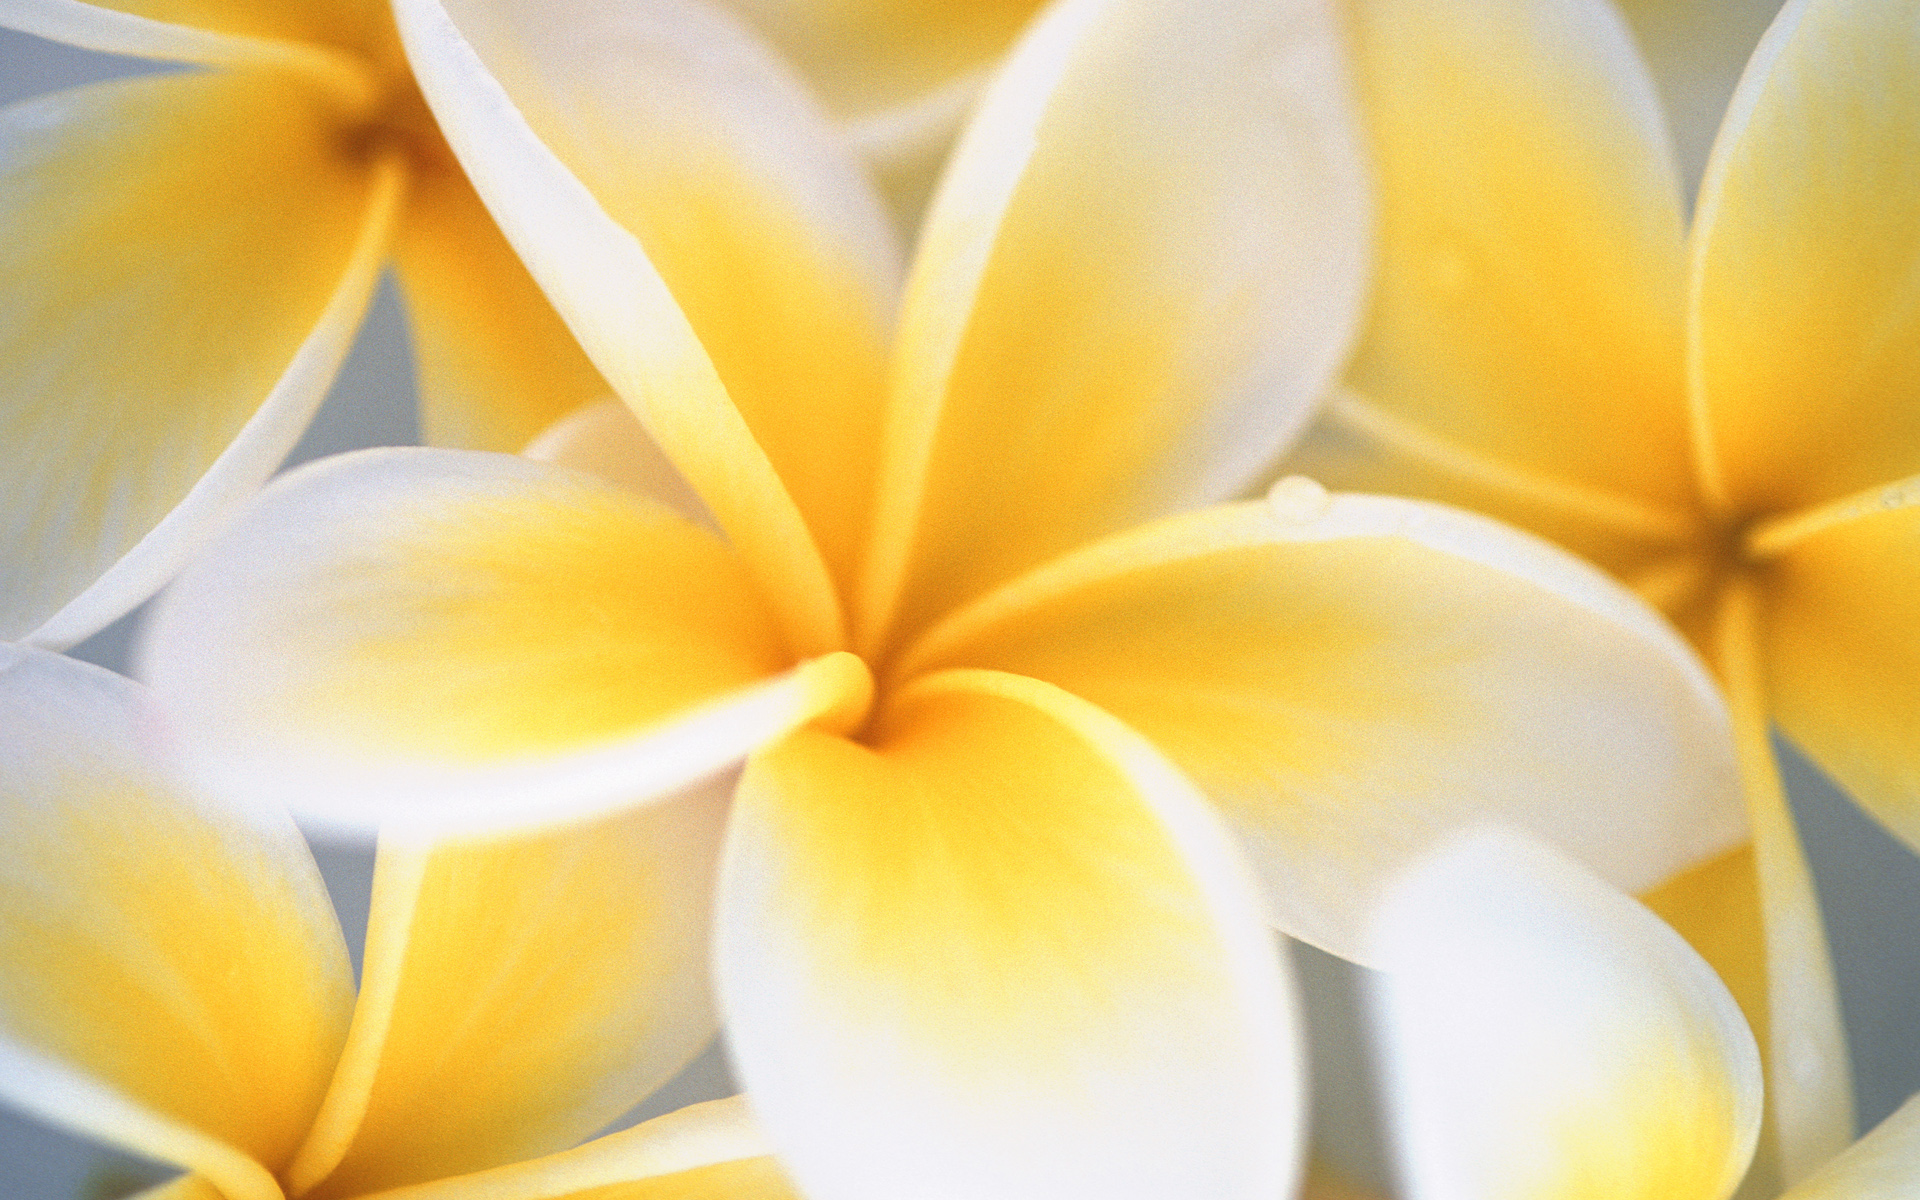 Yellow and White Flowers wallpaper | 1920x1200 | #23775